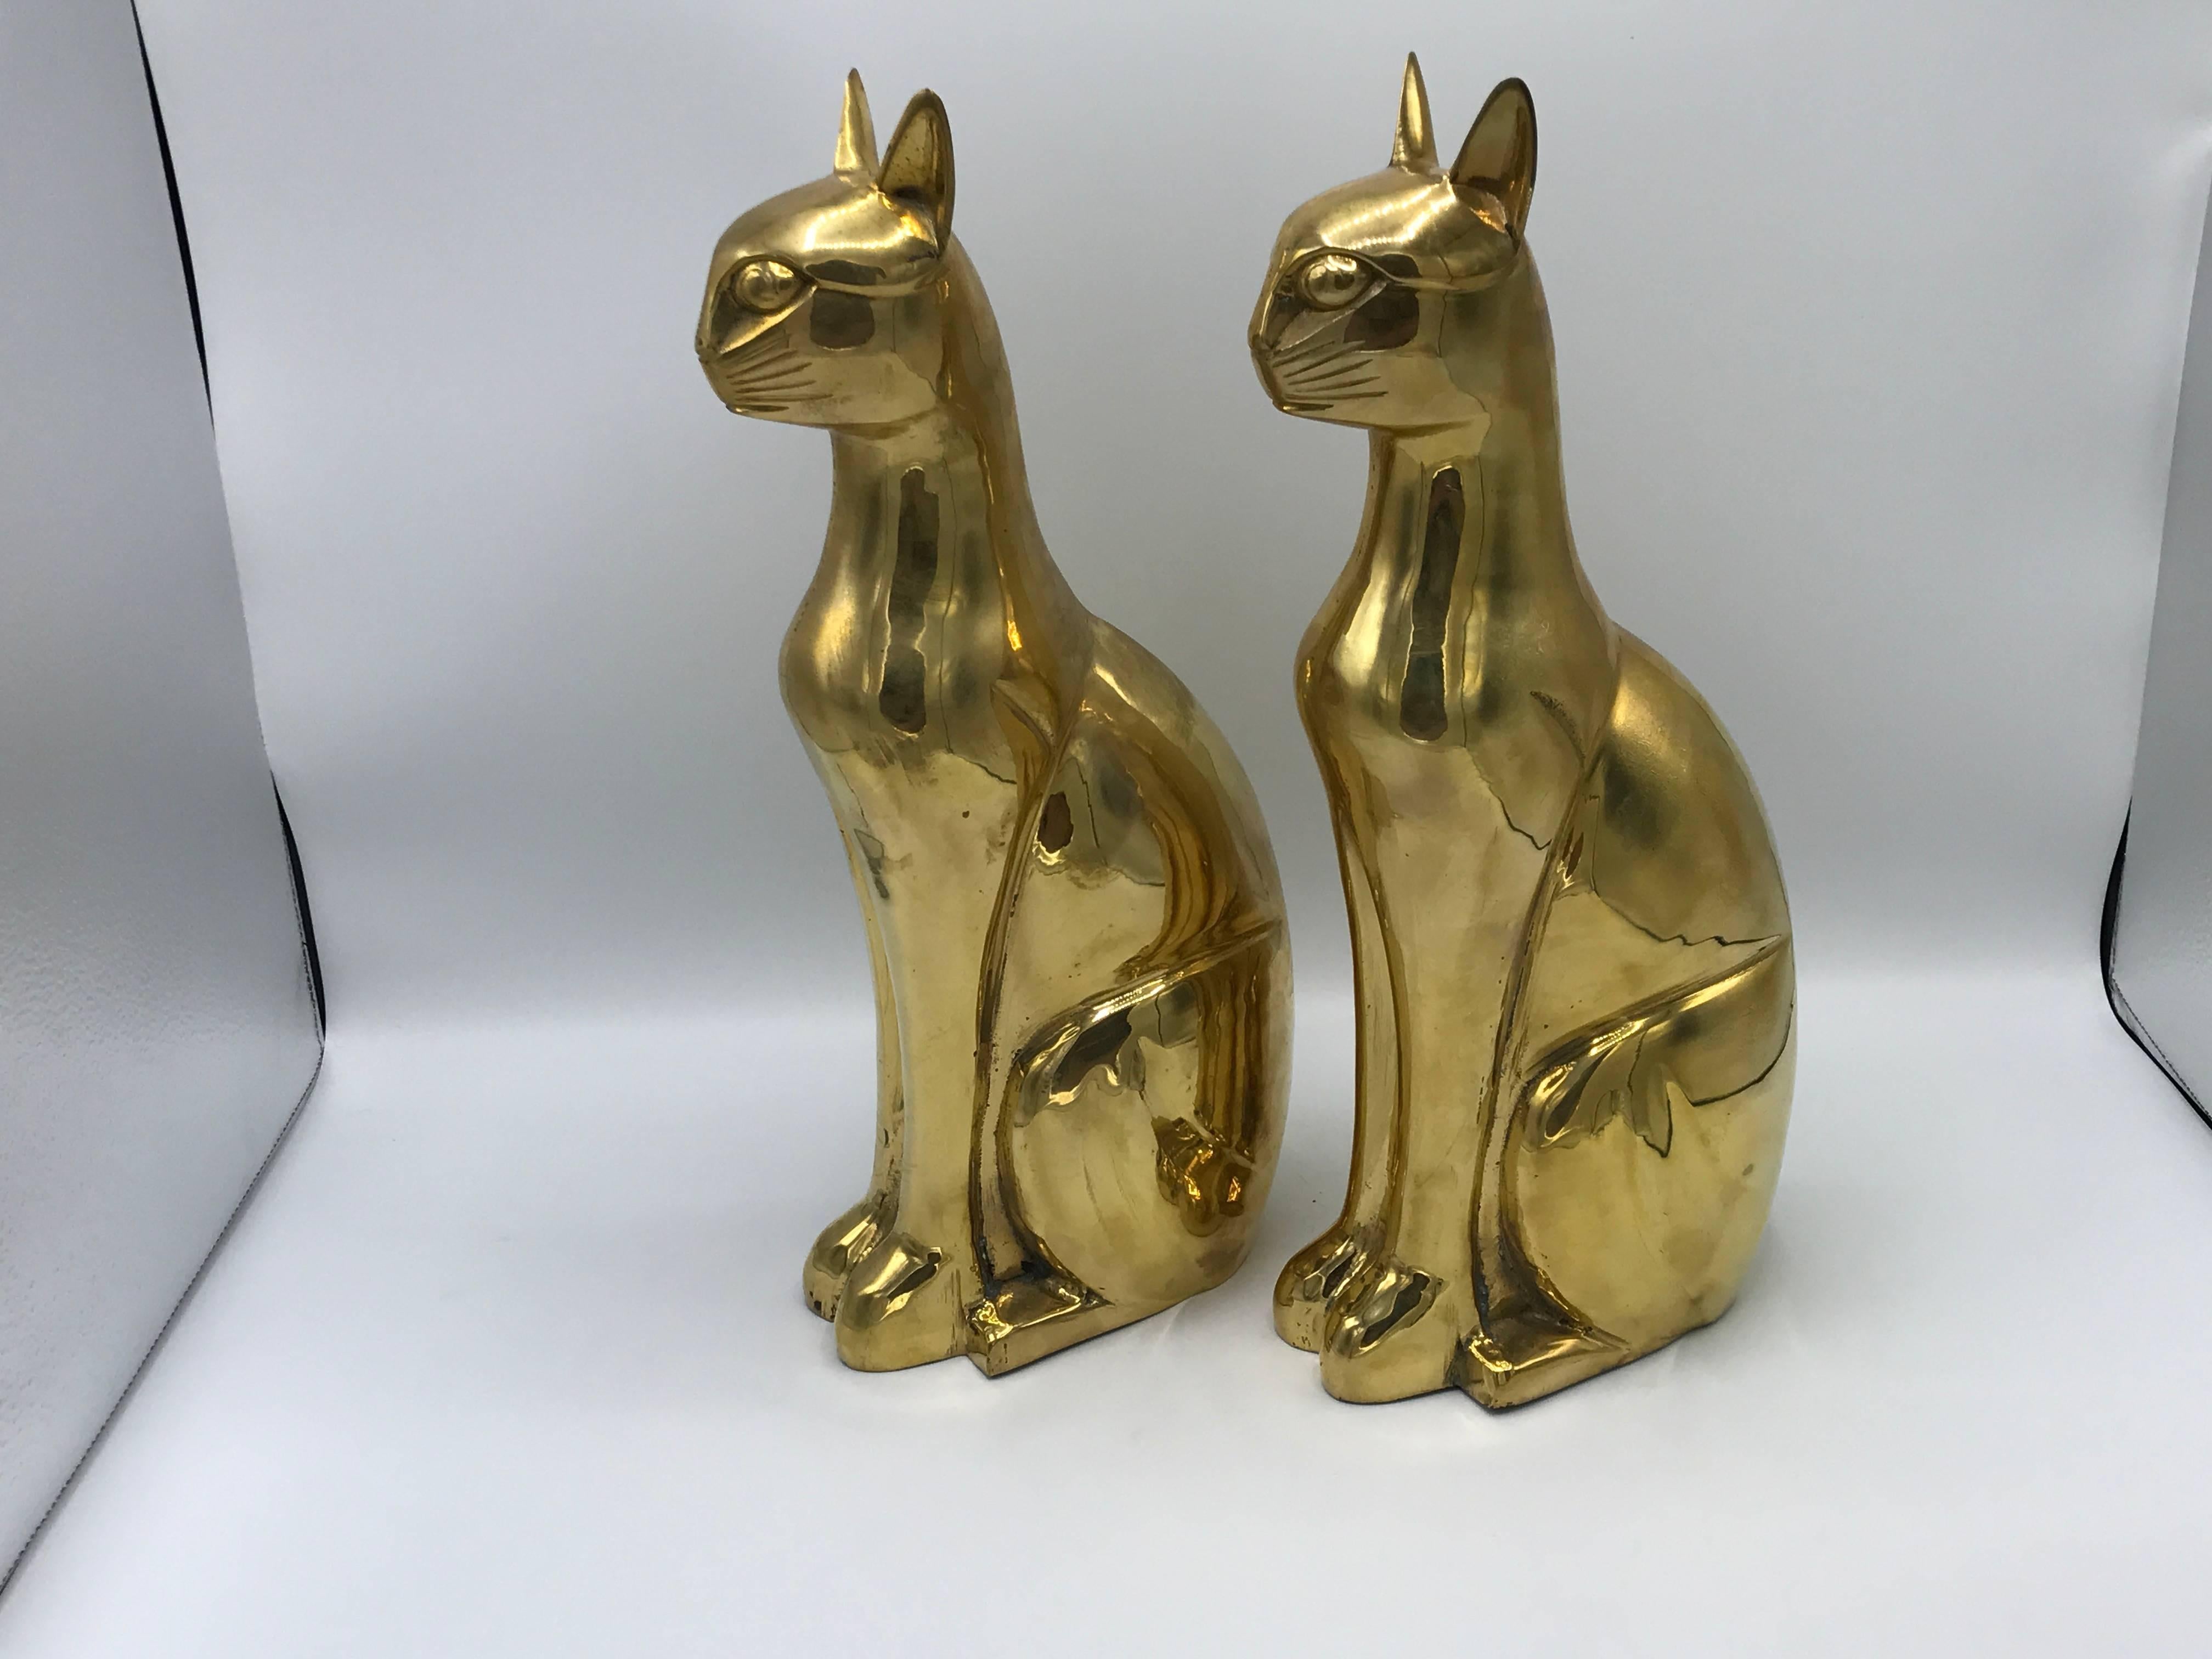 Offered is a gorgeous, pair of 1960s Italian brass cat sculptures. Heavy, even though the pair are hollow inside. Thick brass.